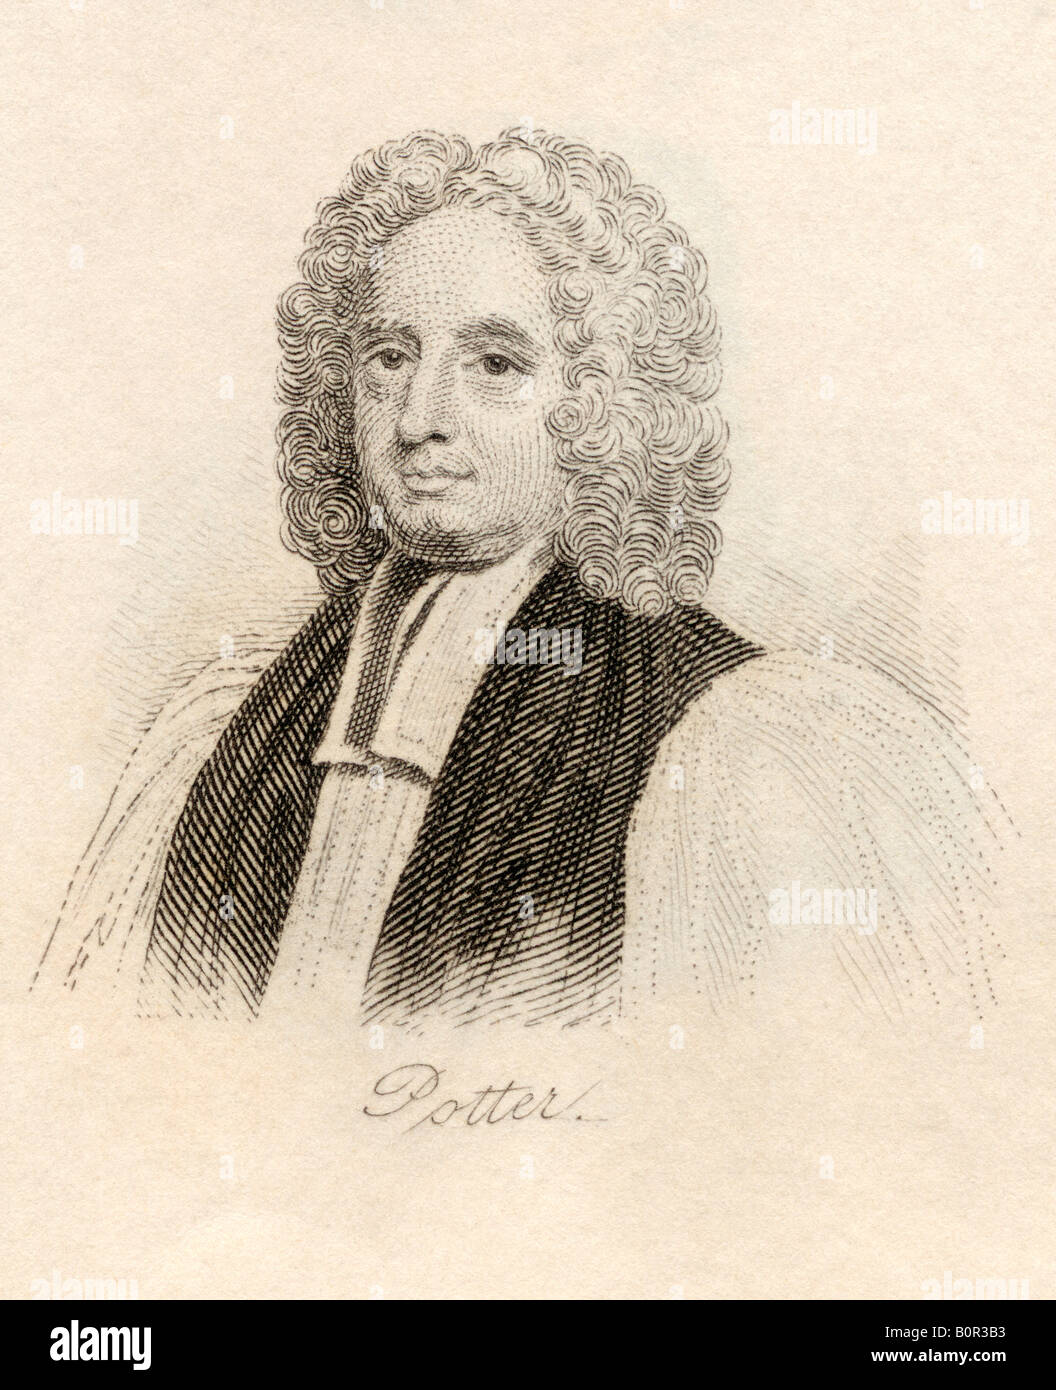 John Potter, 1674 -1747. Archbishop of Canterbury. From the book Crabbs Historical Dictionary, published 1825. Stock Photo